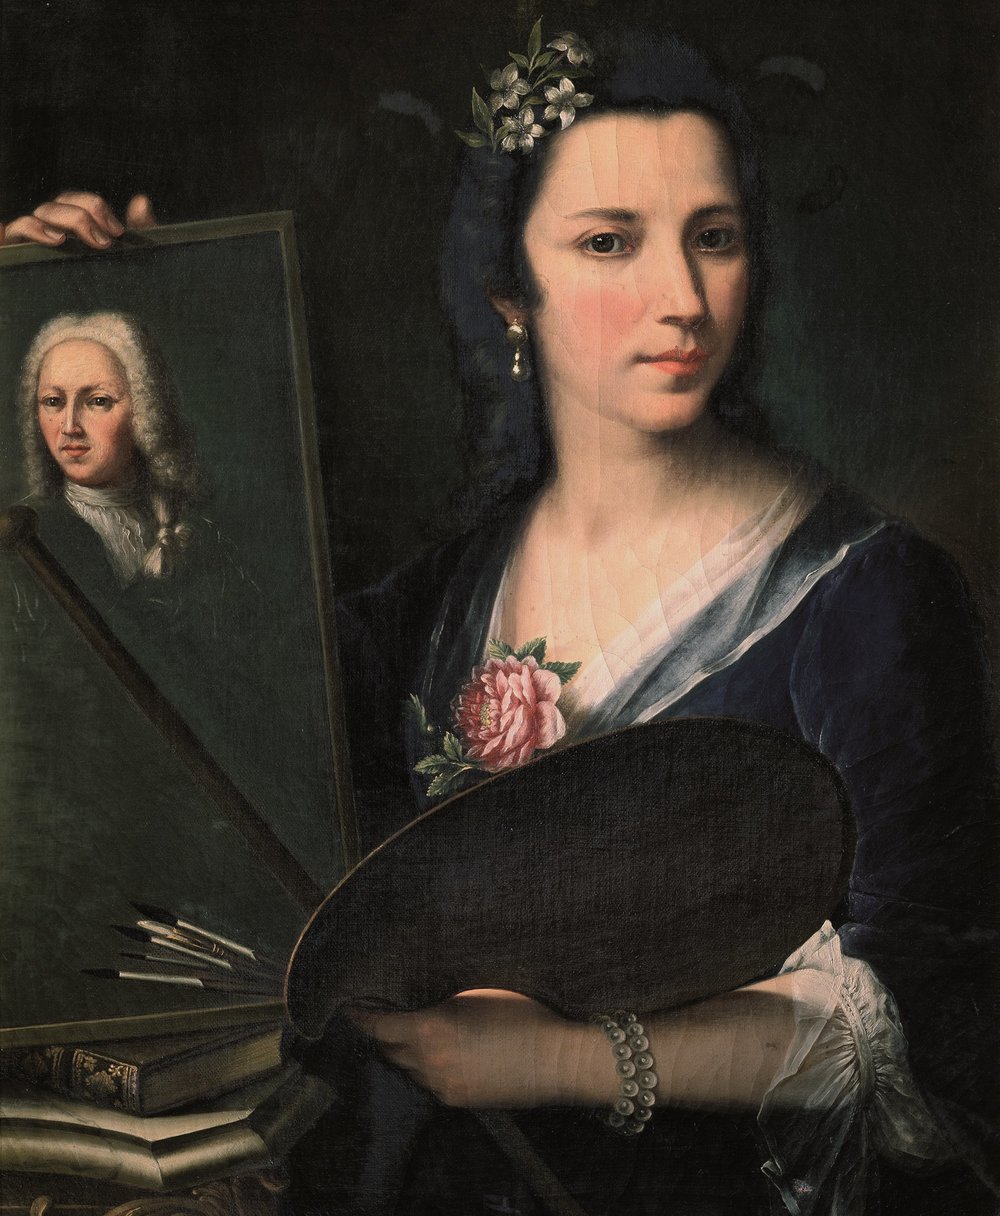 A half-length portrait of the artist, holding a palette, brushes, Mahl stick, and a portrait of a man. She looks directly at the viewer with flowers in her hair and at her bust. She is elegantly dressed in a blue velvet gown with diaphanous white fabric at the collar and sleeve.